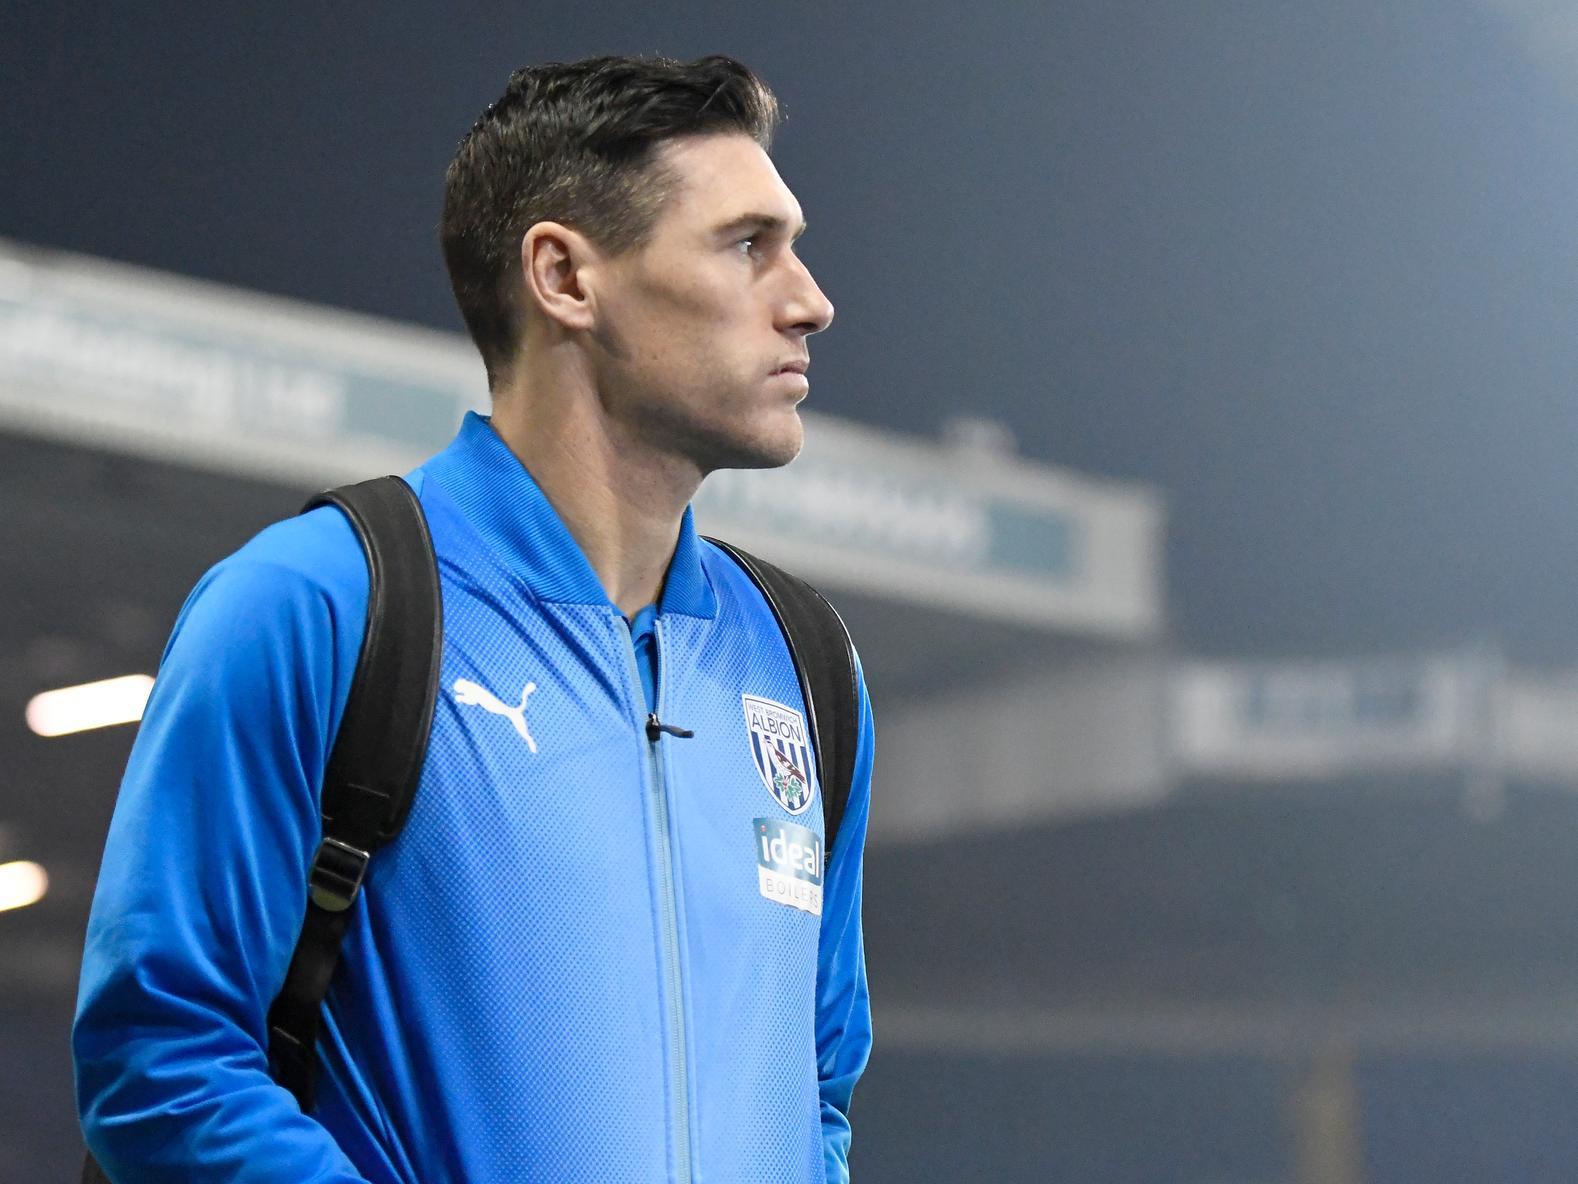 West Bromwich veteran Gareth Barry, 38, is set to sign a new short-term contract with the club, after recovering from a knee injury that threatened to finish off his illustrious career. (The Sun)